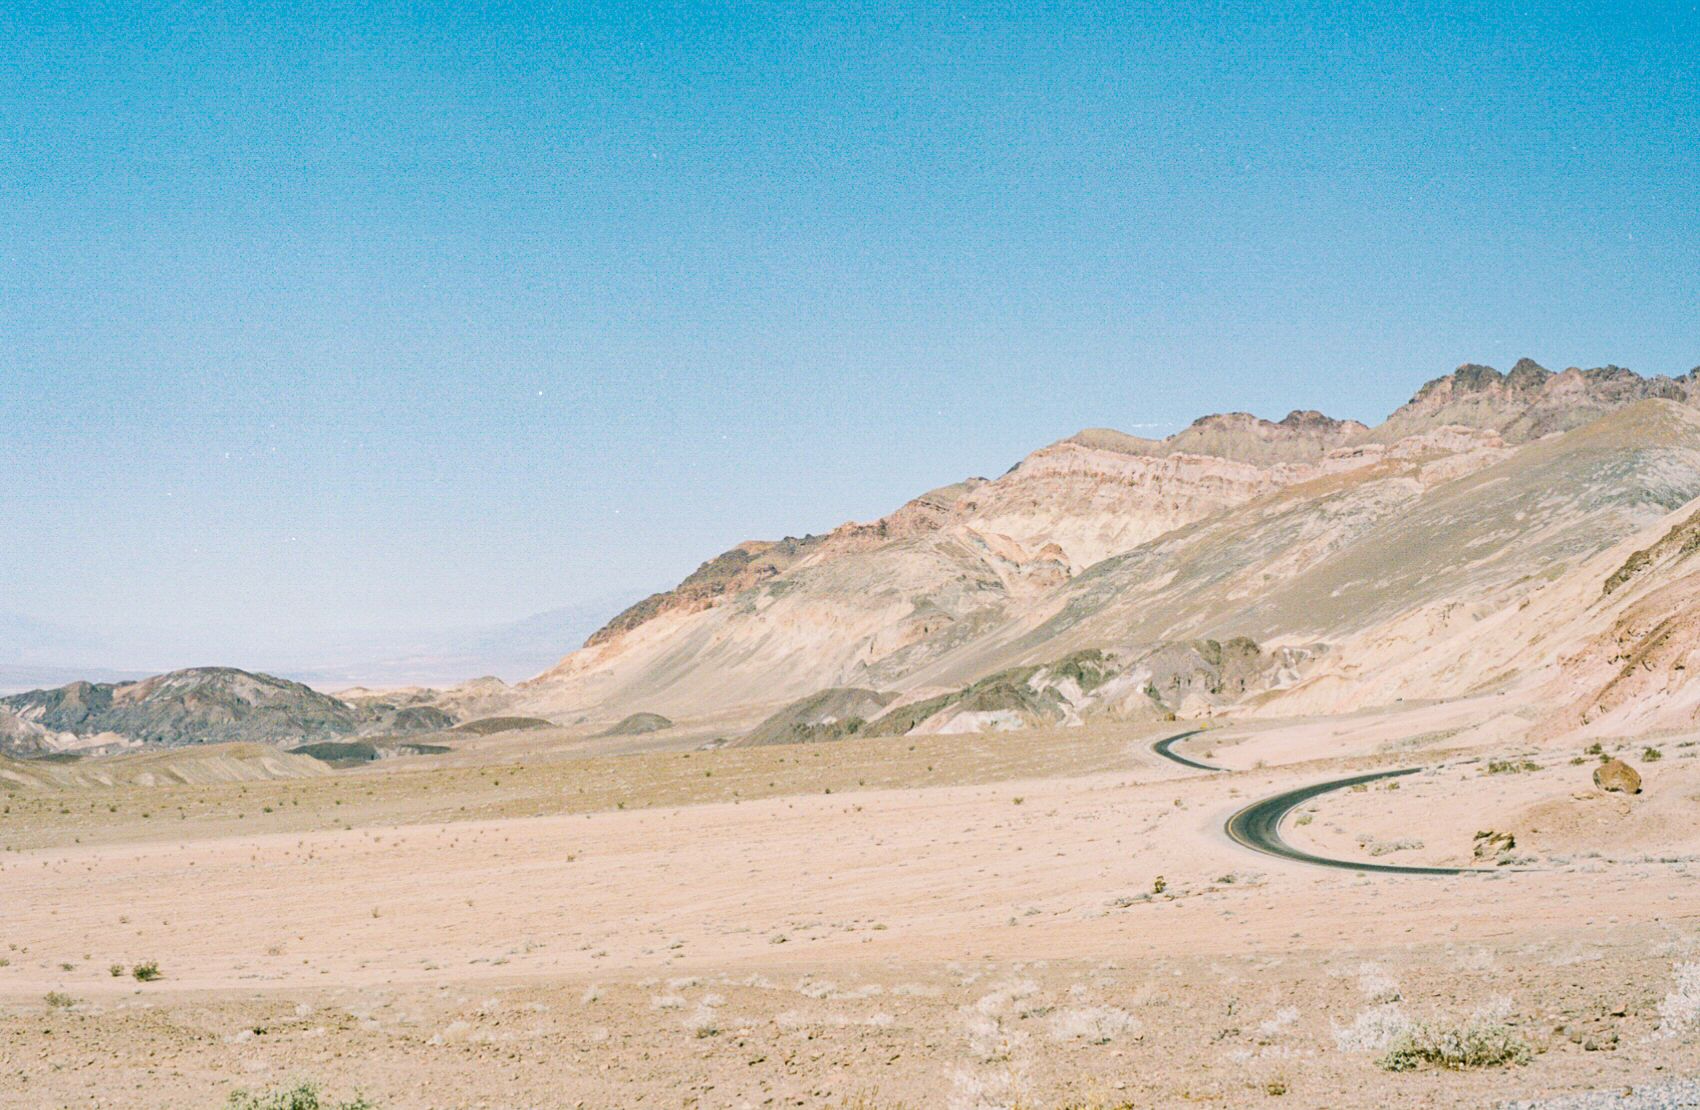 A winding road along the base of the mountains at the edge of Death Valley